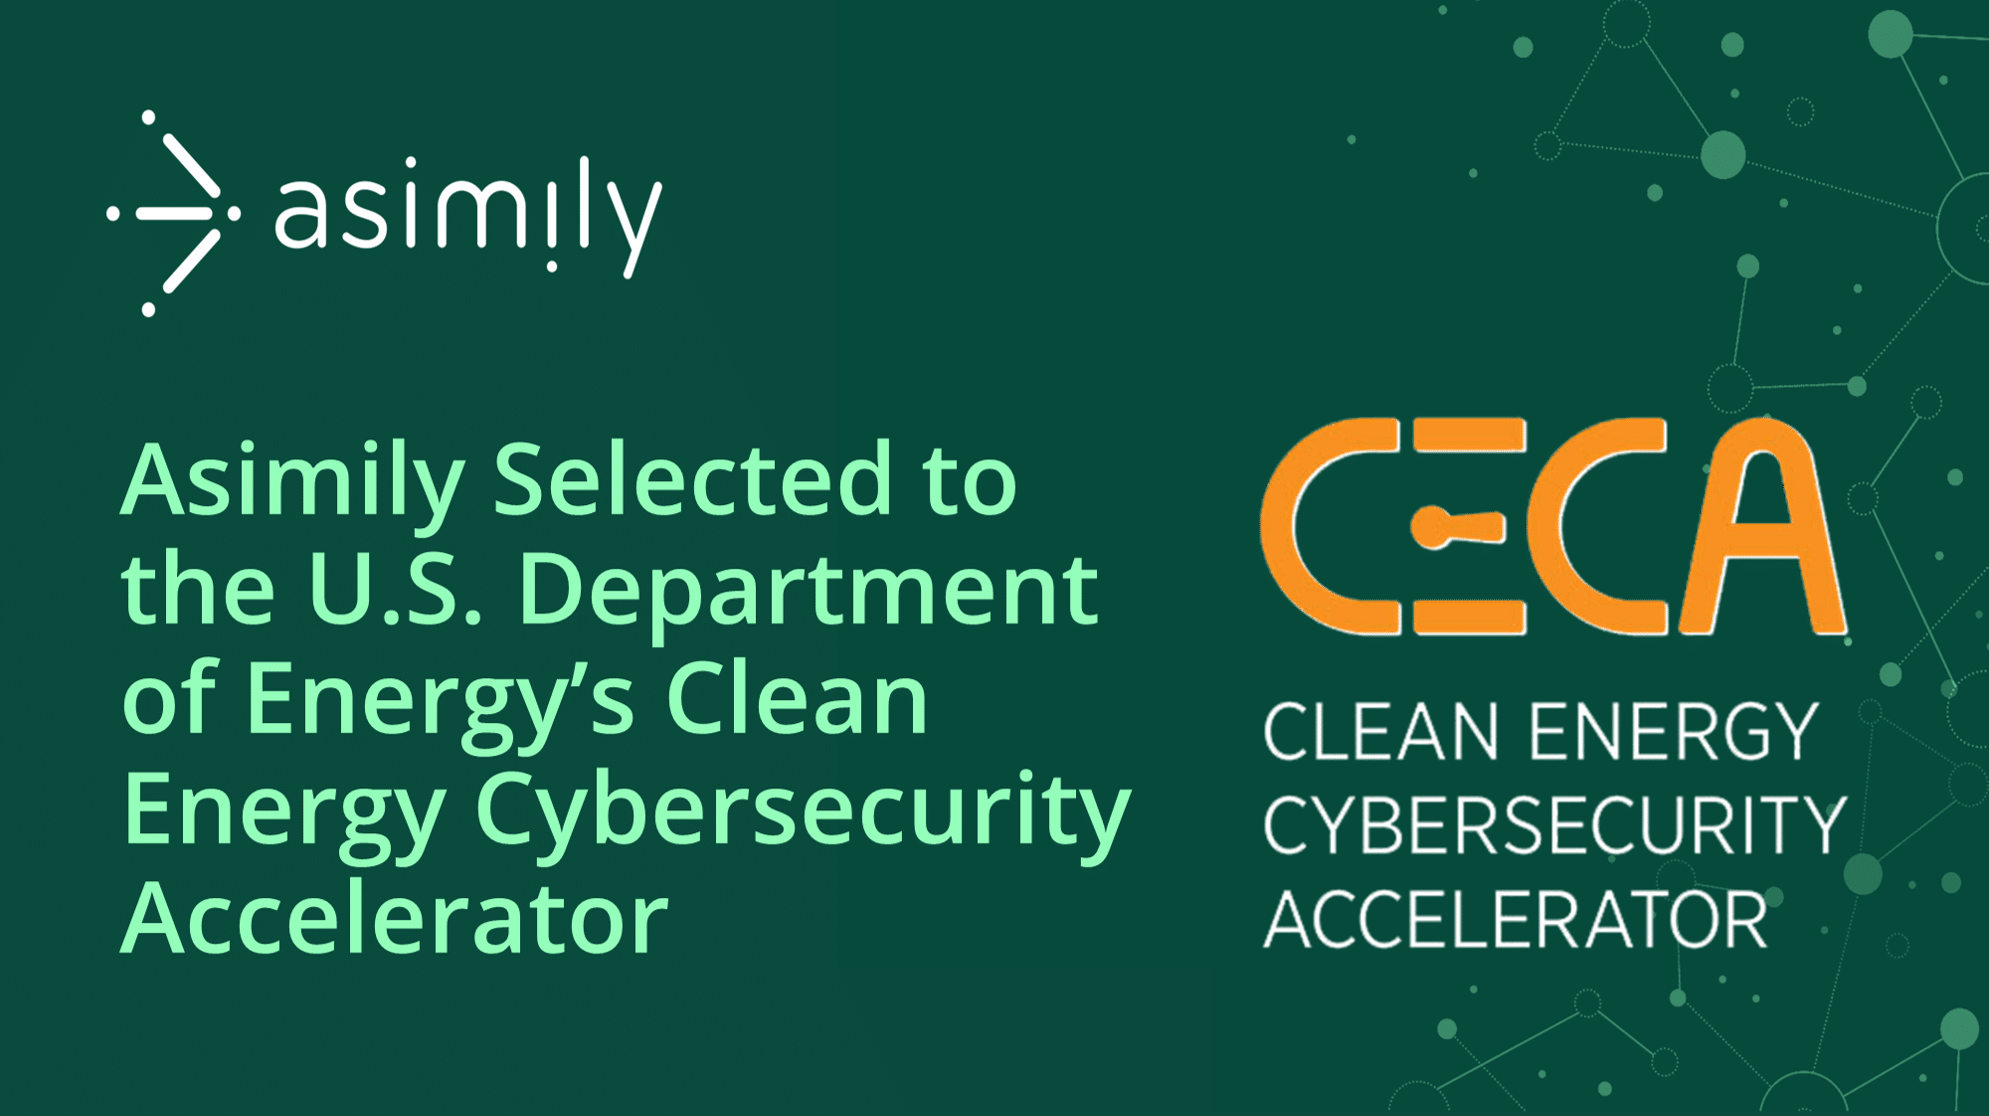 Asimily Selected to the U.S. Department of Energy’s Clean Energy Cybersecurity Accelerator